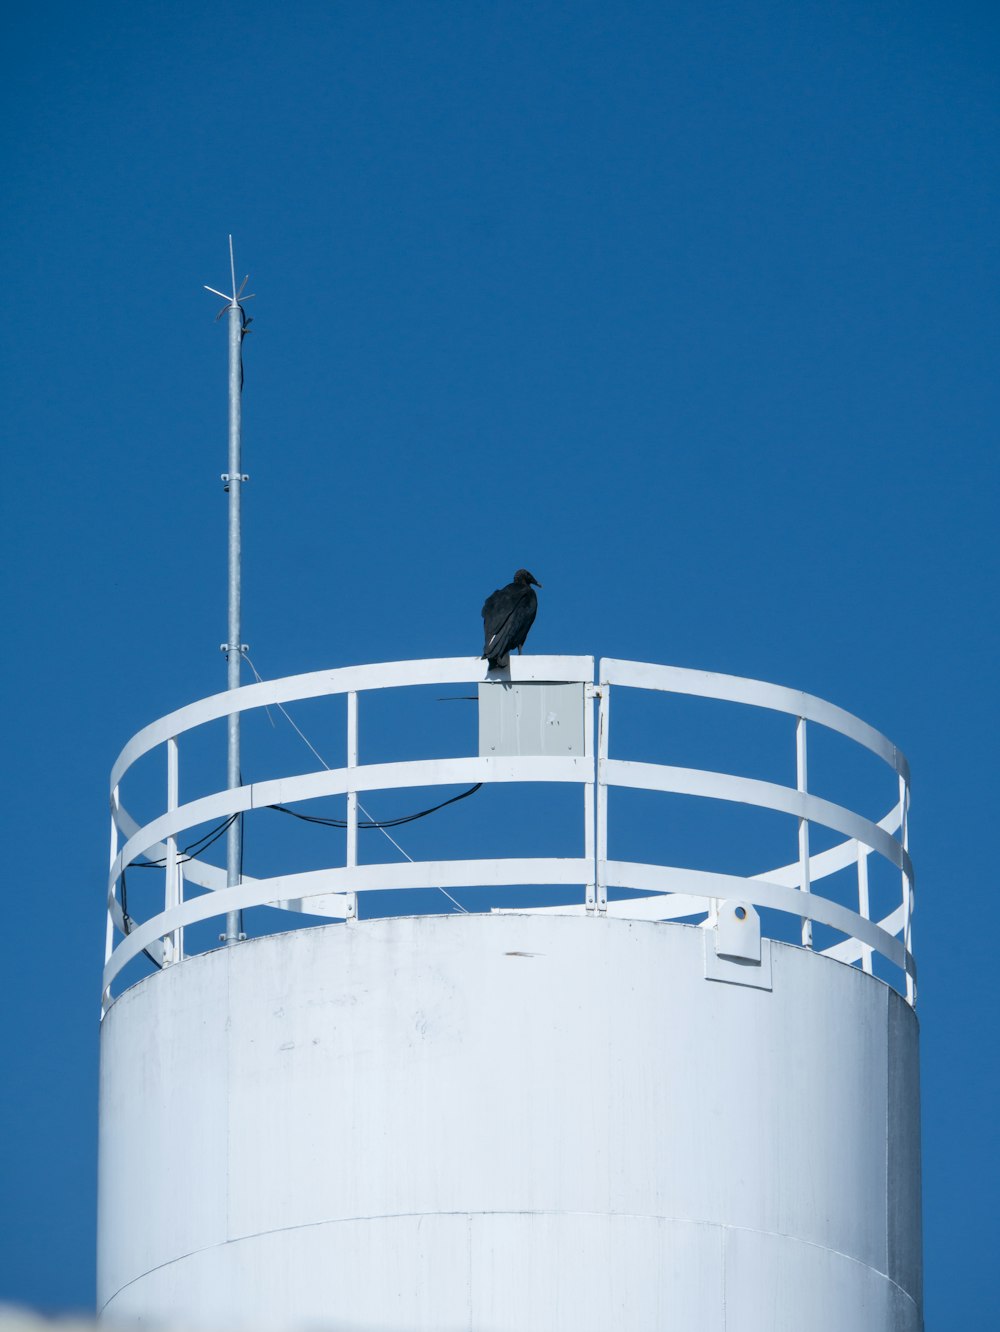 a black bird sitting on top of a white tower